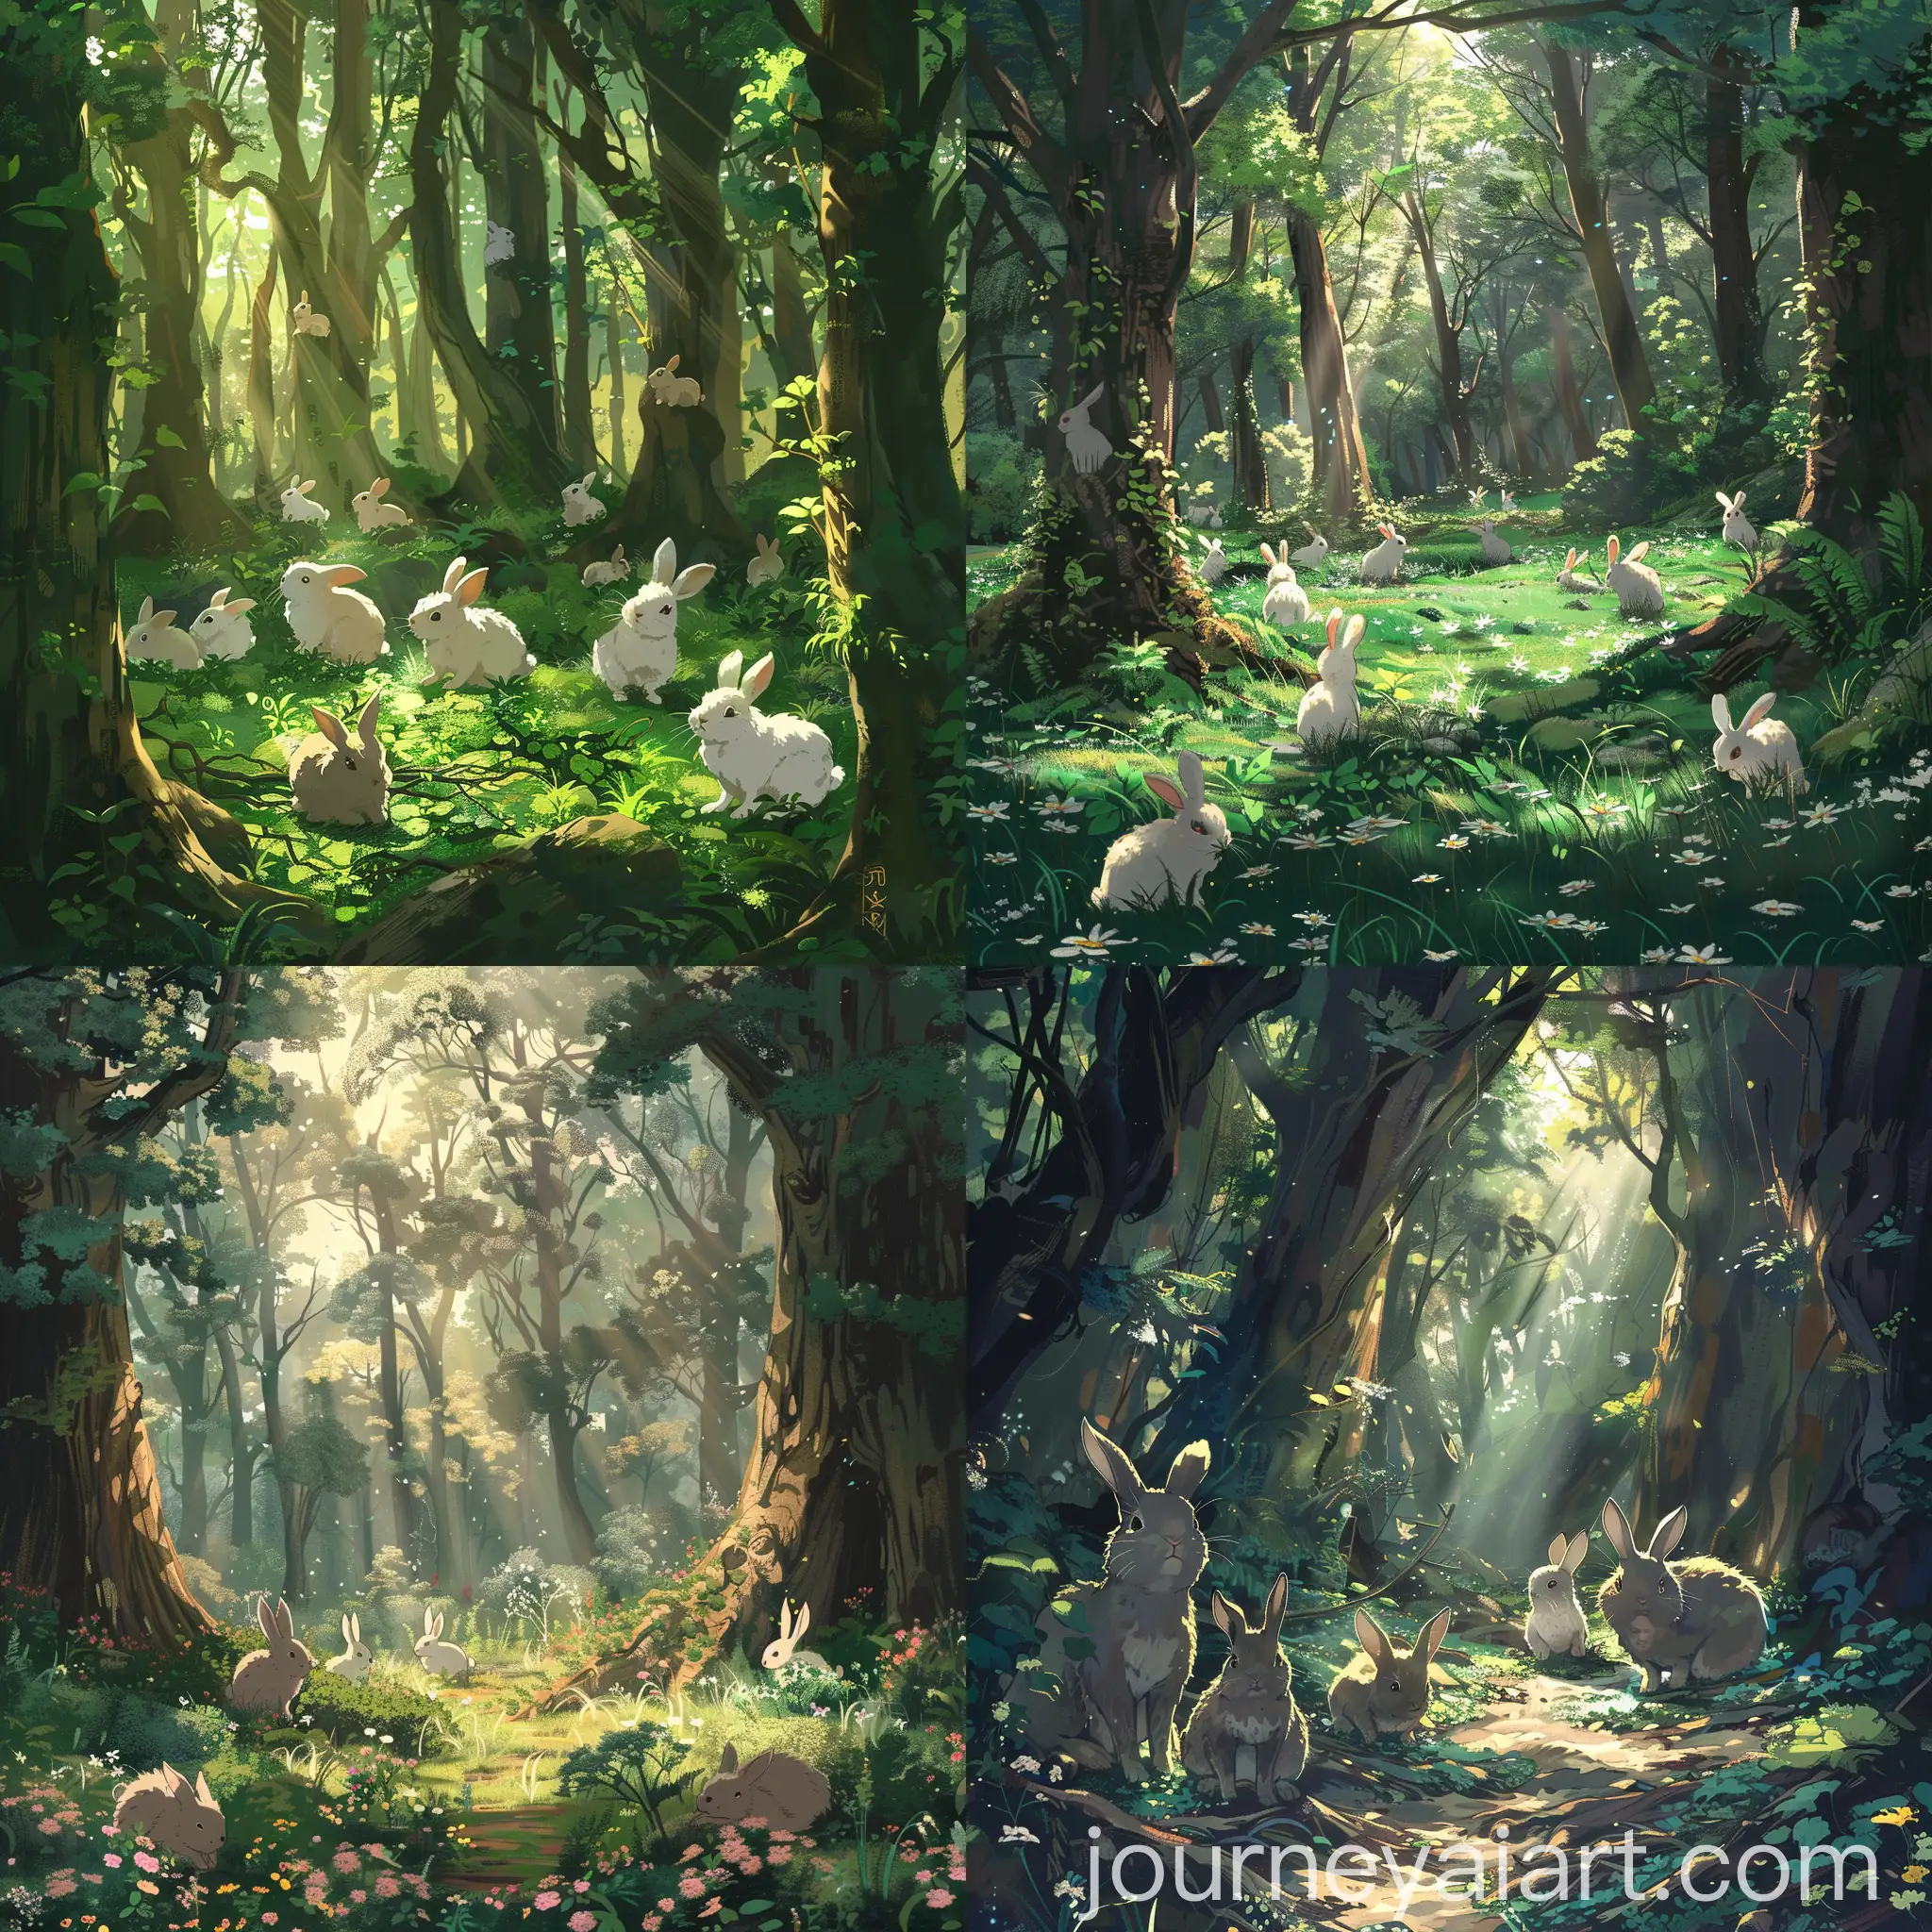 Enchanting-Ghibli-Style-Forest-with-Playful-Rabbits